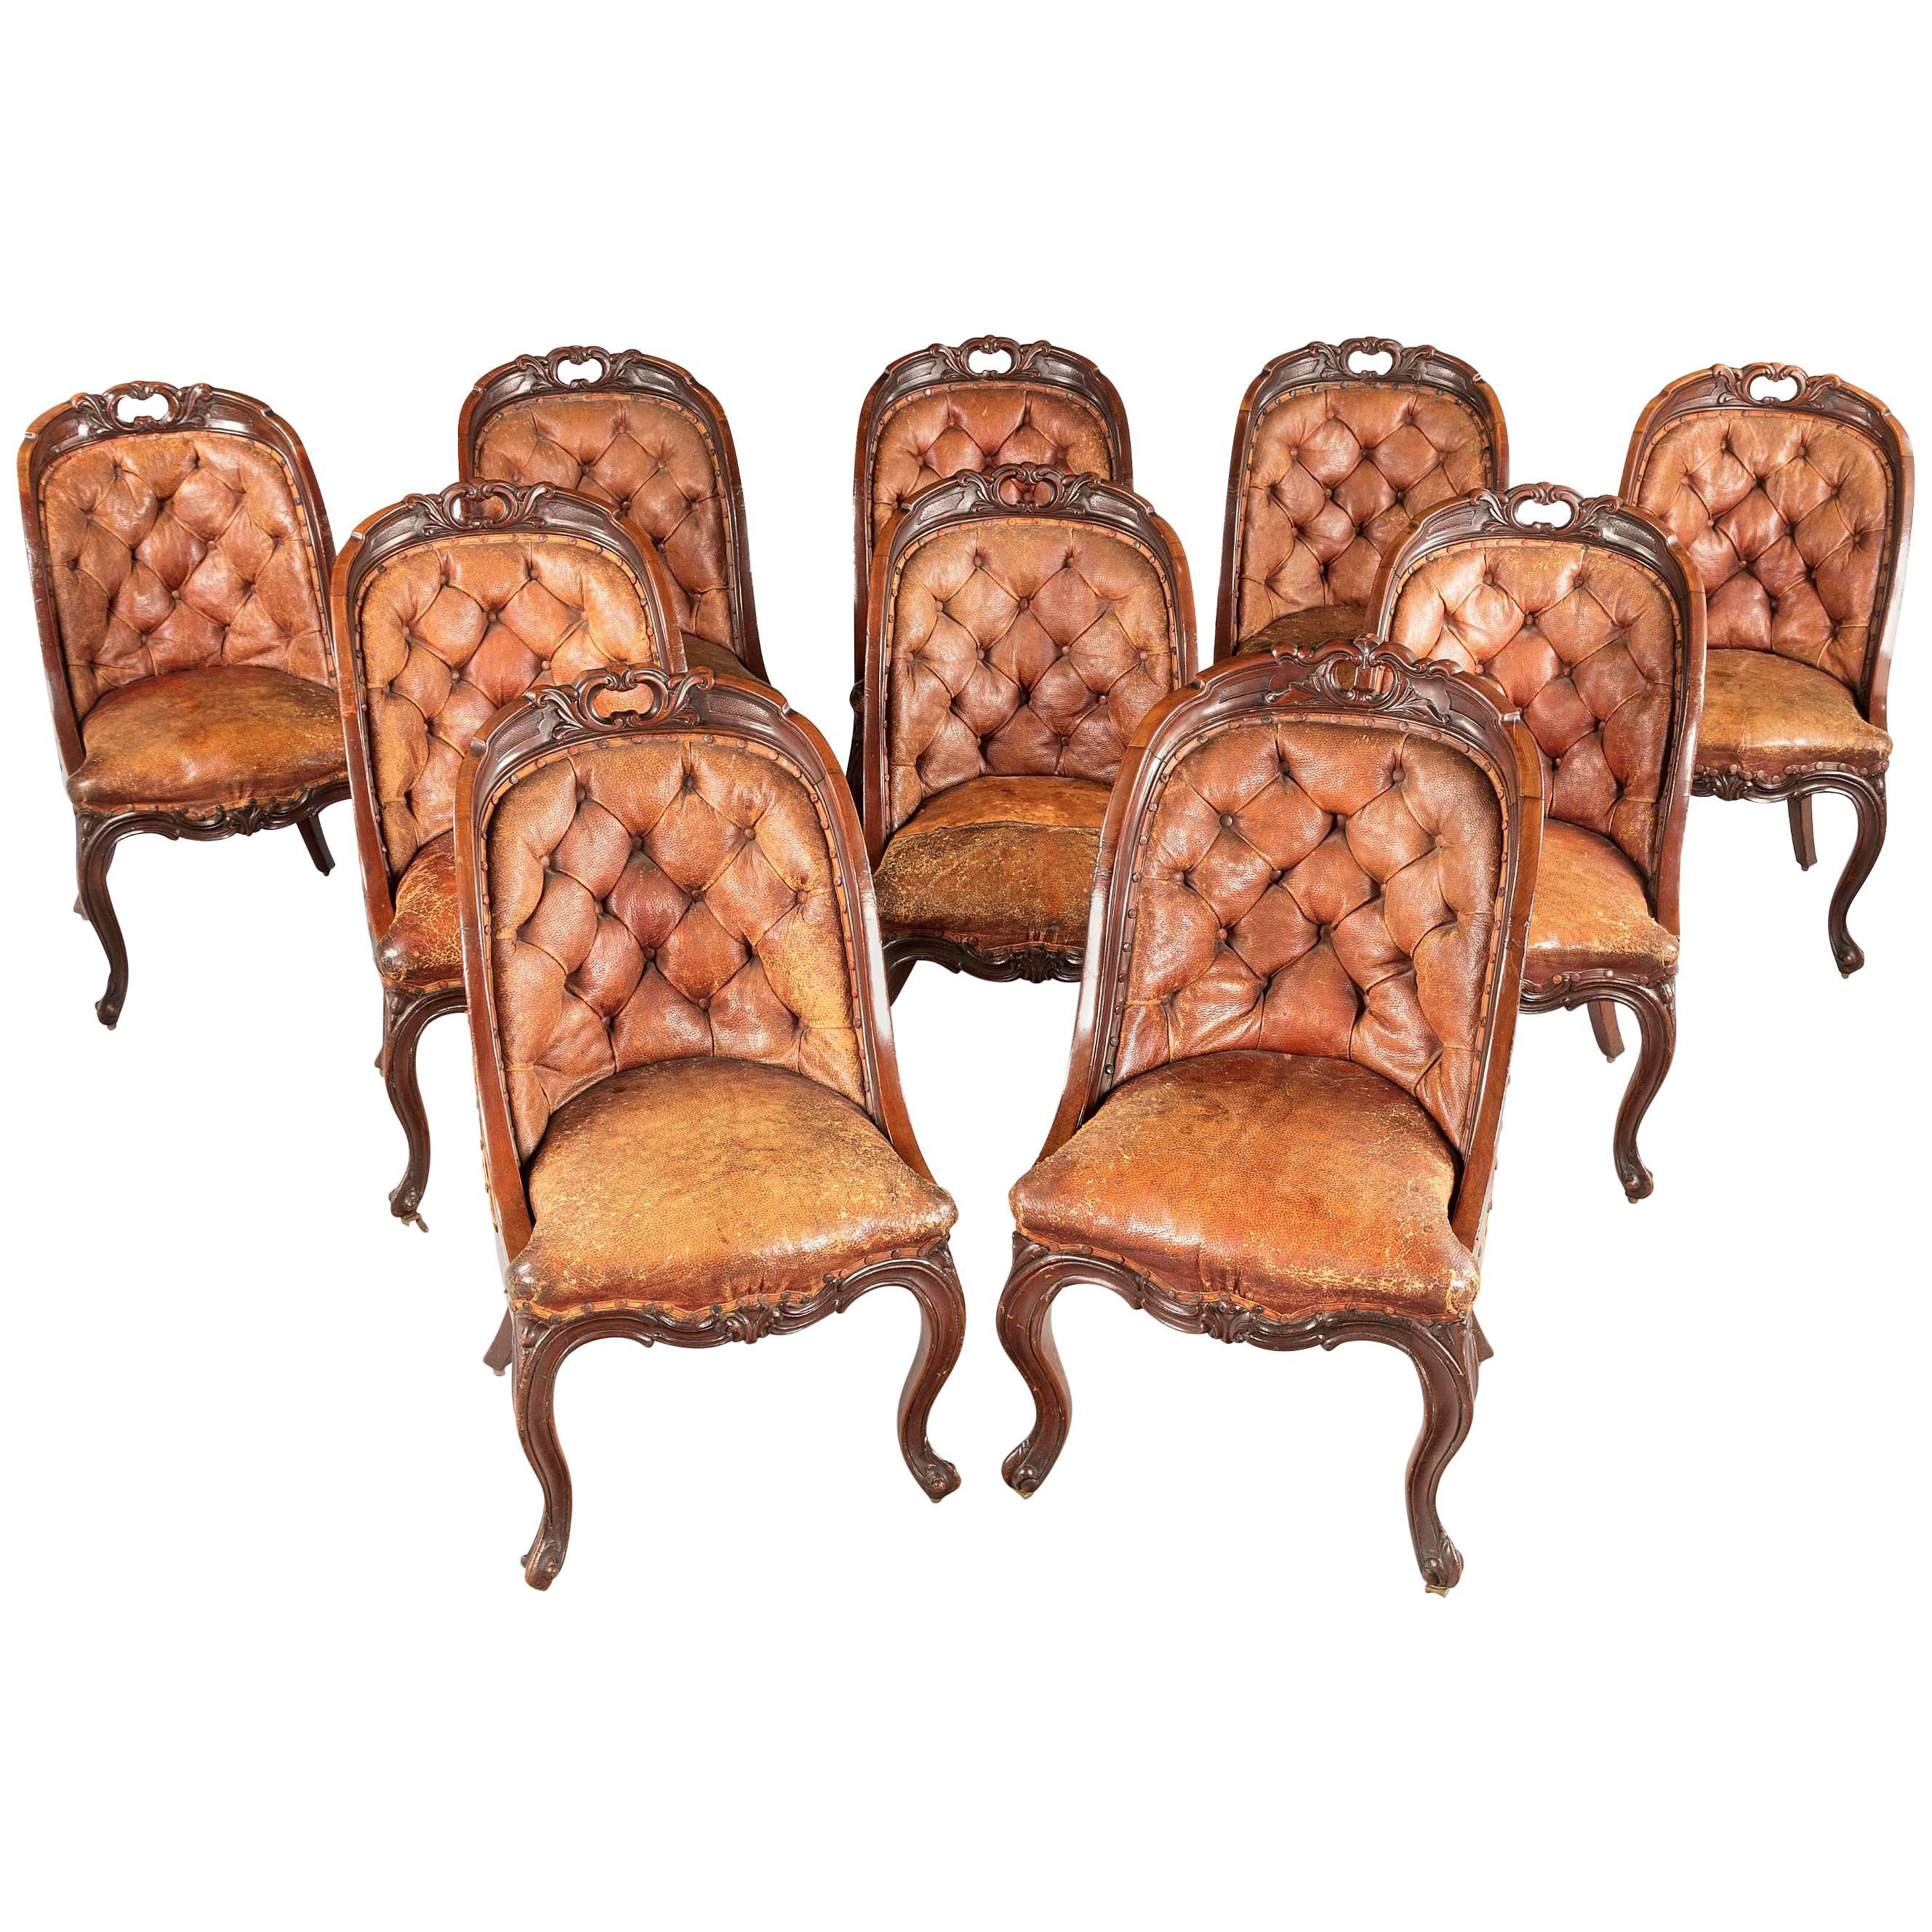 Set of Ten Mid-19th Century Button Back Mahogany Chairs